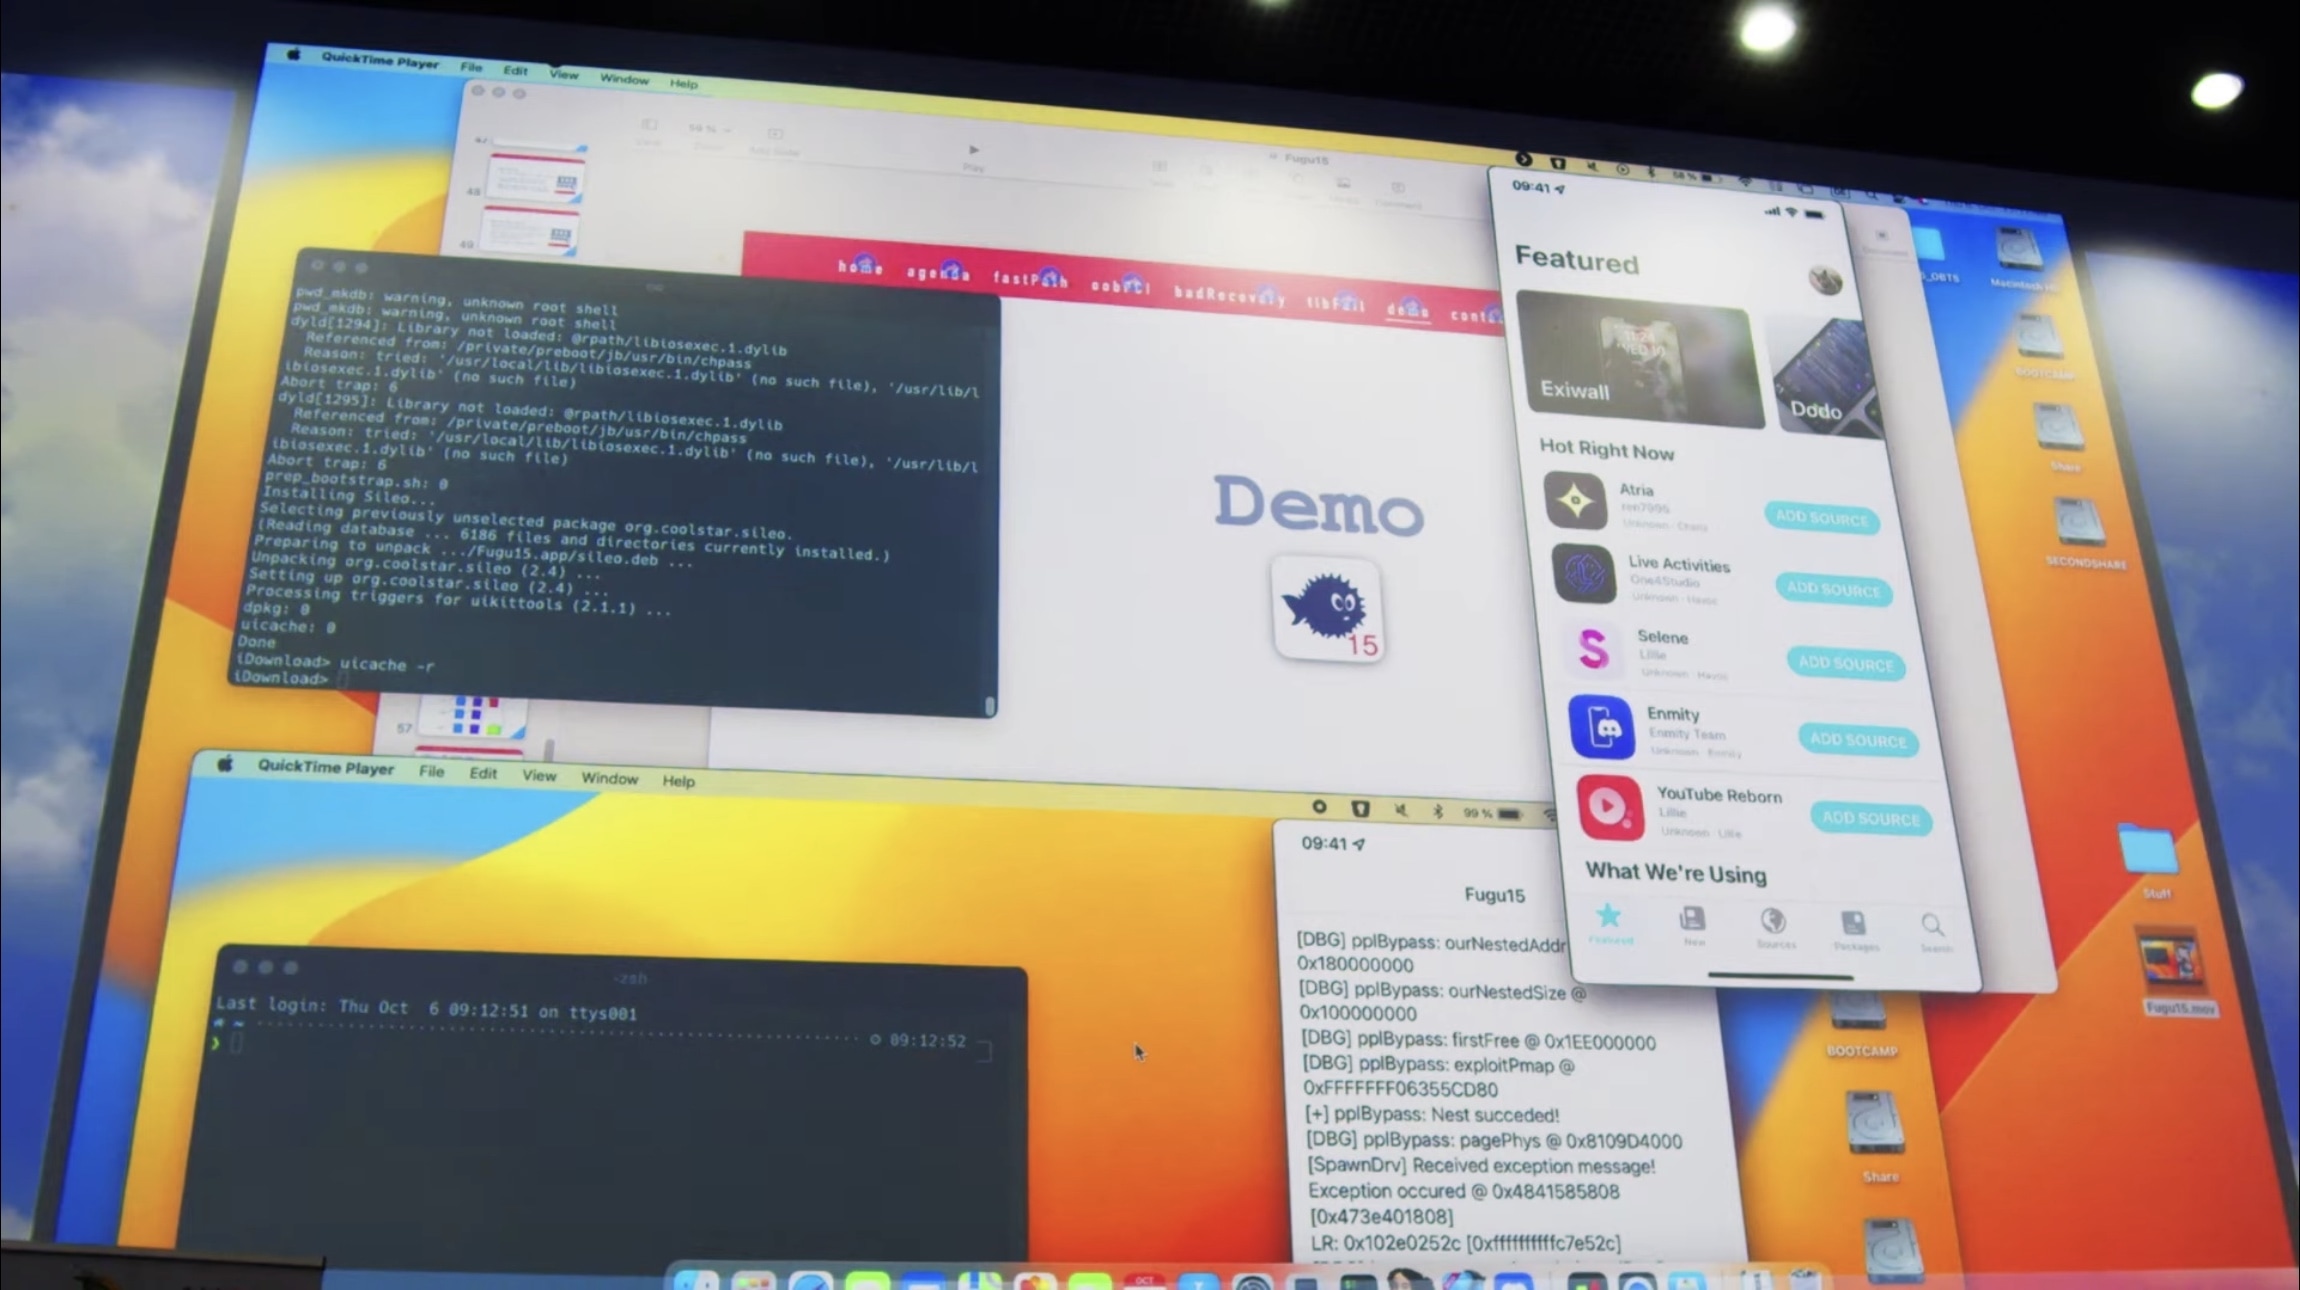 Fugu15 jailbreak demoed by Linus Henze on an iOS 15.4.1 device at the Objective by the Sea security conference.